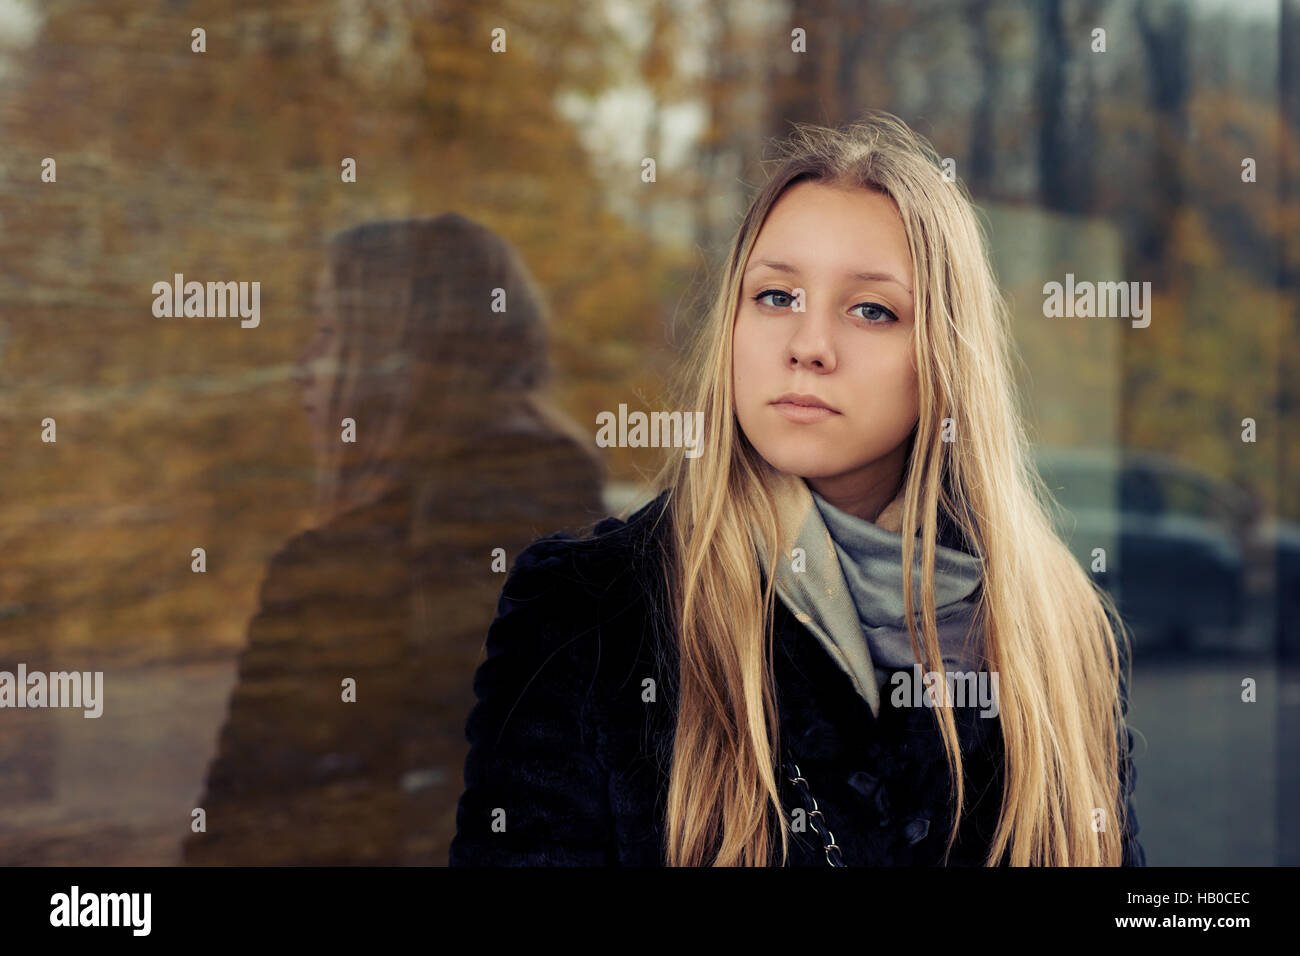 Portrait of a teen girl with long hair in a coat Stock Photo - Alamy